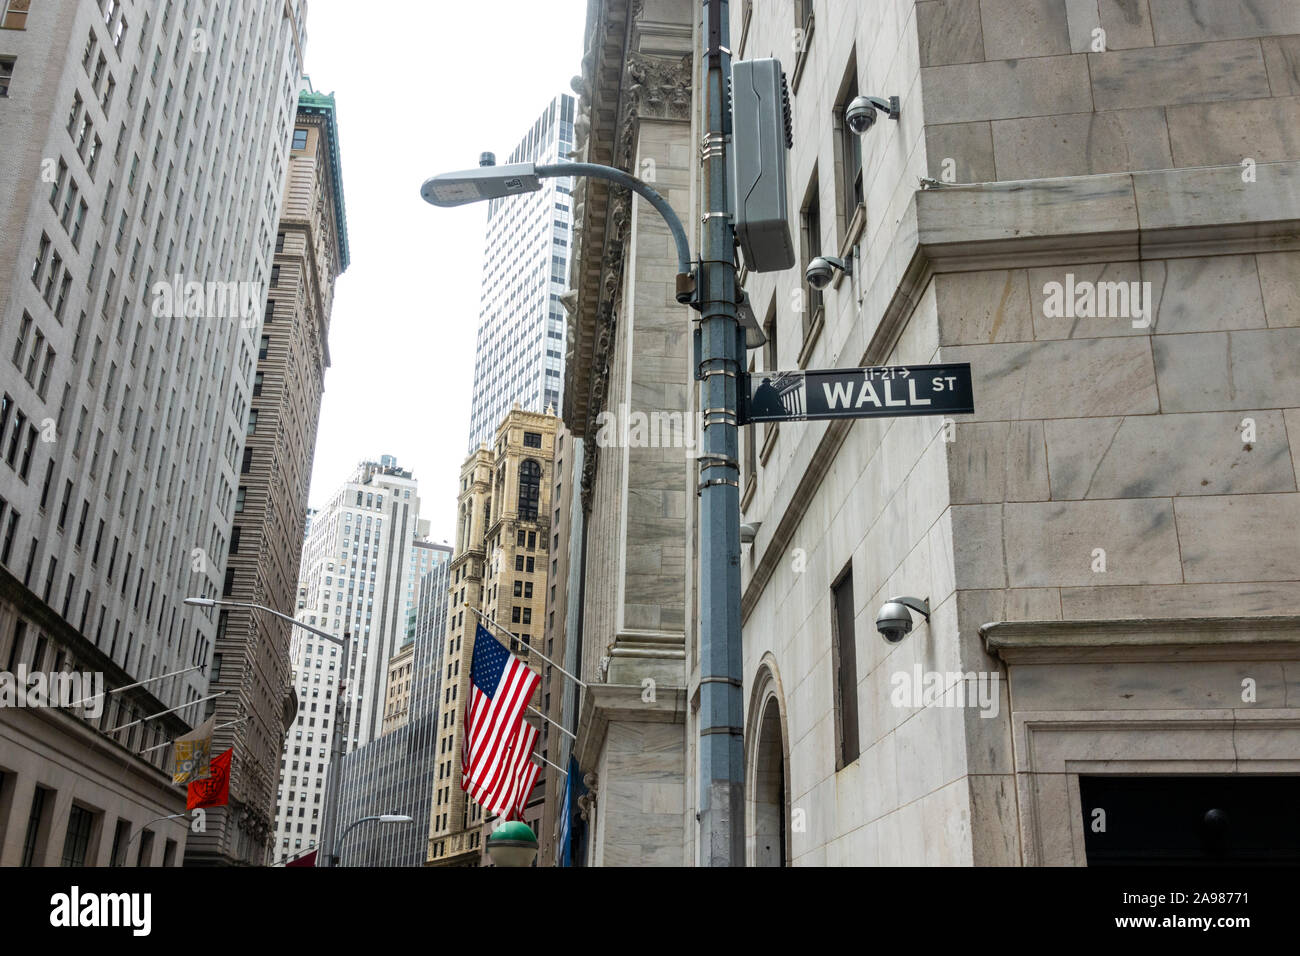 Wall St street sign with US flag flying on the New York Stock Exchange and skyscrapers in the background Stock Photo